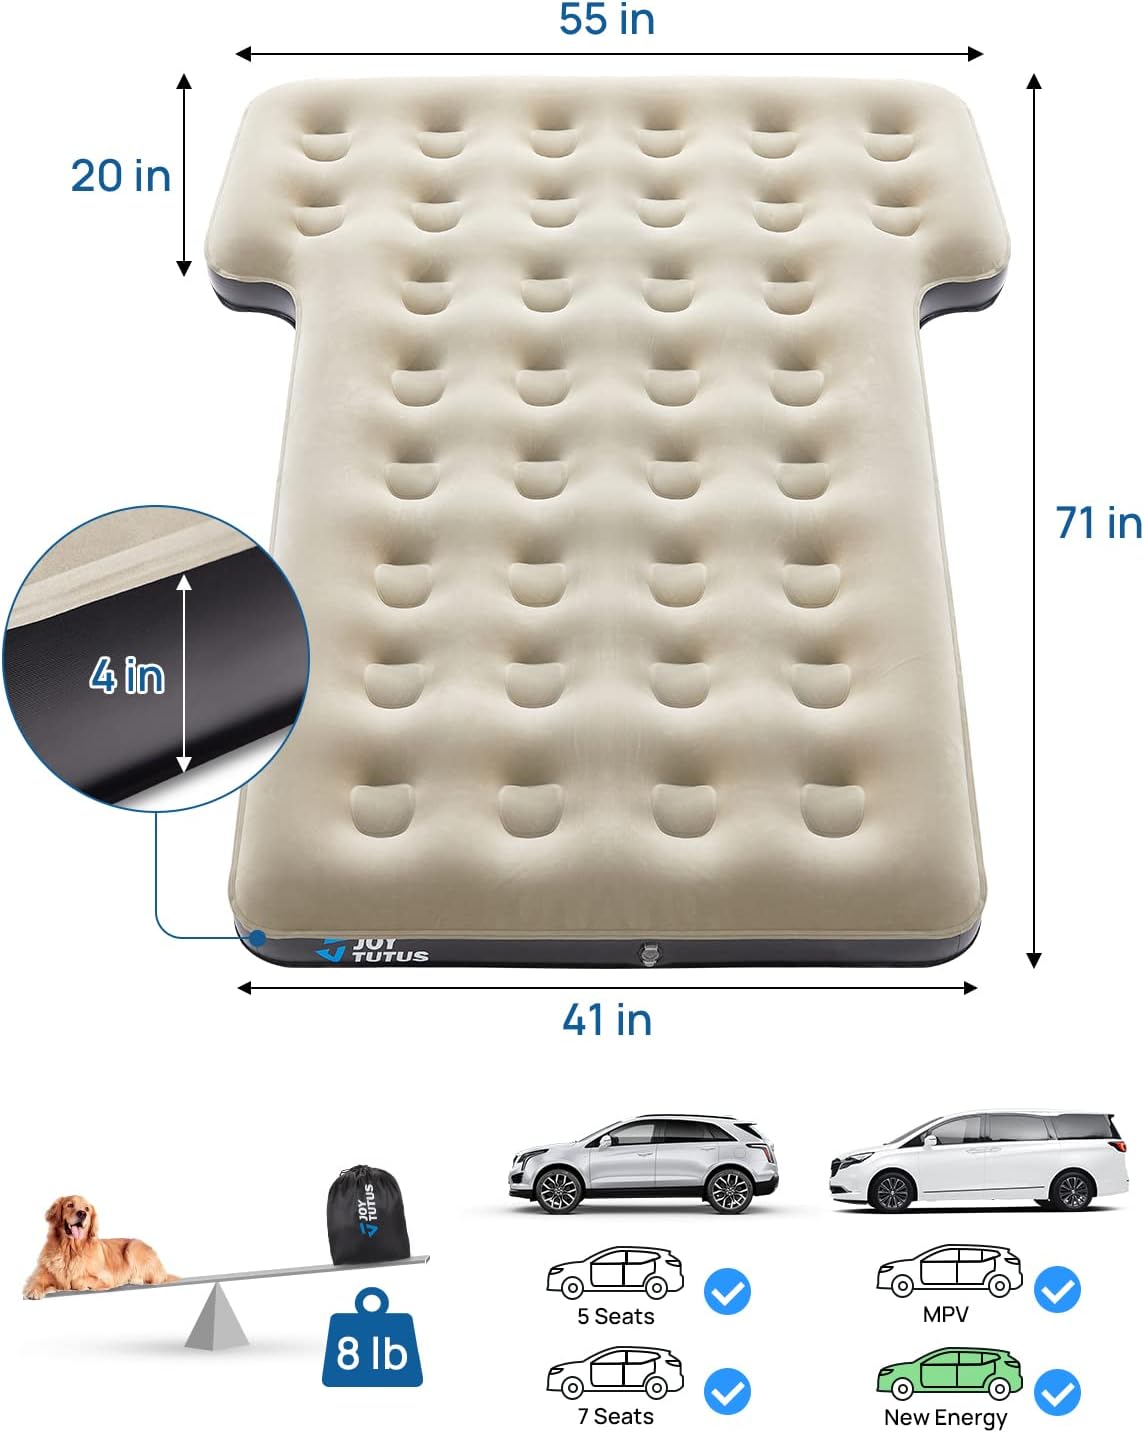 SUV Air Mattress for Car Camping, Thickened & Inflatable Car Mattress for Sleeping Pad